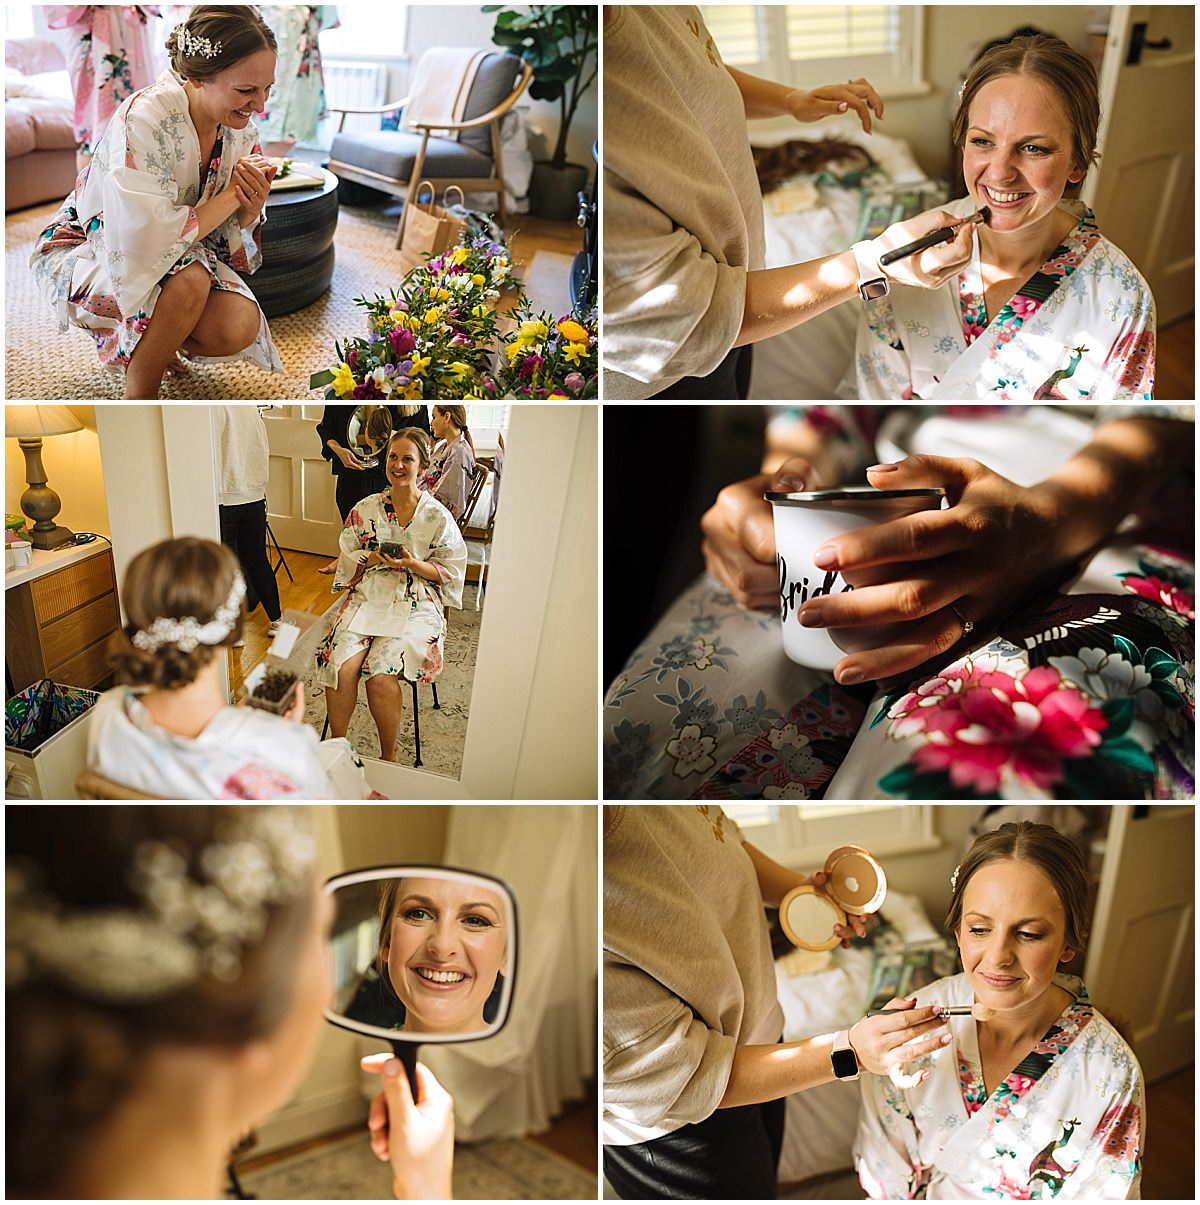 A collage of six images showing a bride's preparation on her wedding day at Samlesbury Hall. The photos feature her laughing while sitting on the floor, receiving makeup from a makeup artist, looking in a mirror, sitting in a chair reading a letter, holding a mug labeled "Bride," and getting her makeup done while holding a mirror. She's wearing a floral robe and appears to be in a room filled with natural light.